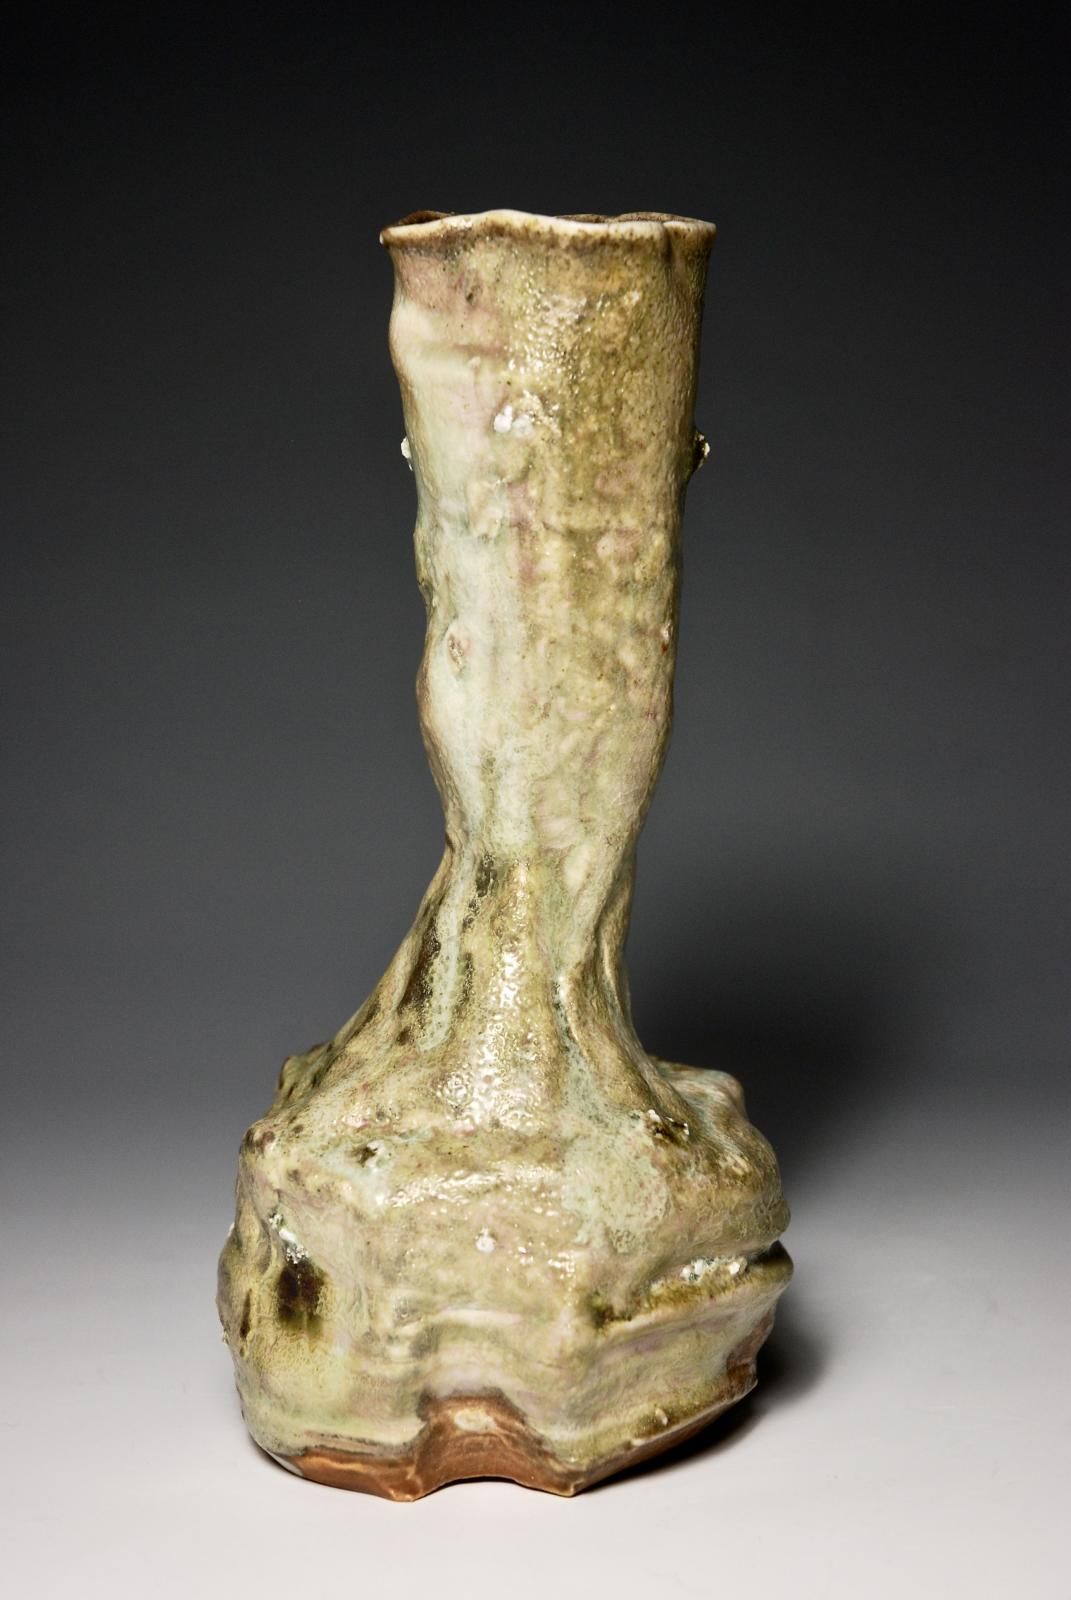 Pourer Individual, slow thrown in 2 parts, hand  assembled and manipulated, with a trimmed foot. Porcelain Body with local sourced indigenous rock grits.Celadon glaze with varying ash patternation.Fired in the middle zones of my small Anagama kiln in a 72 hr firing 1320C. Reduction Cooled by Sim Taylor